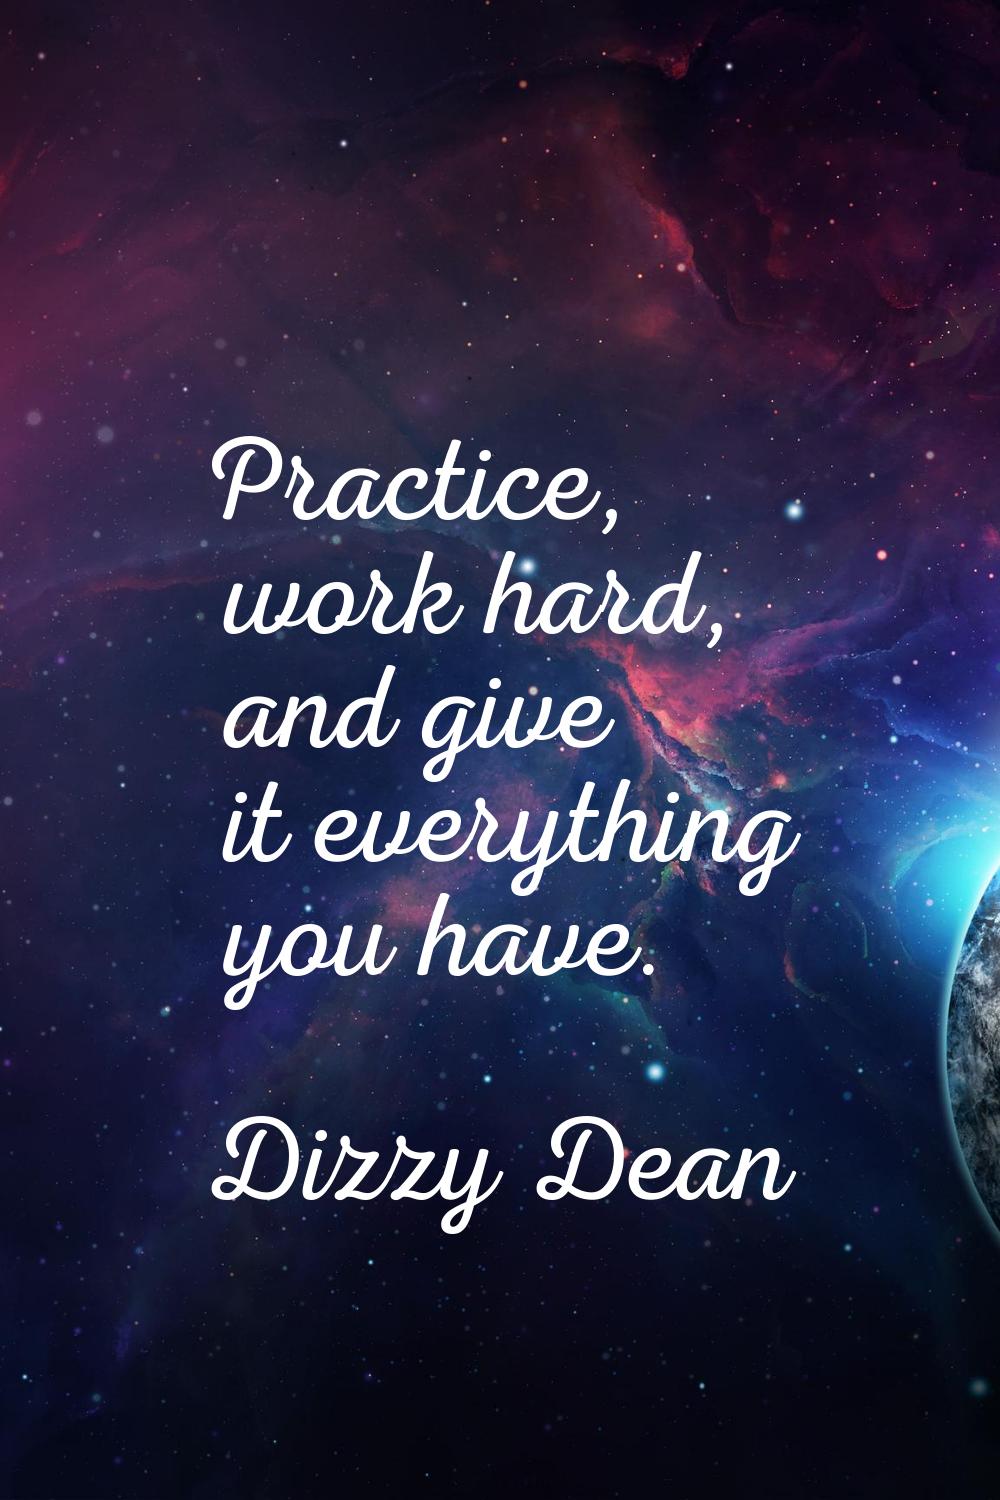 Practice, work hard, and give it everything you have.